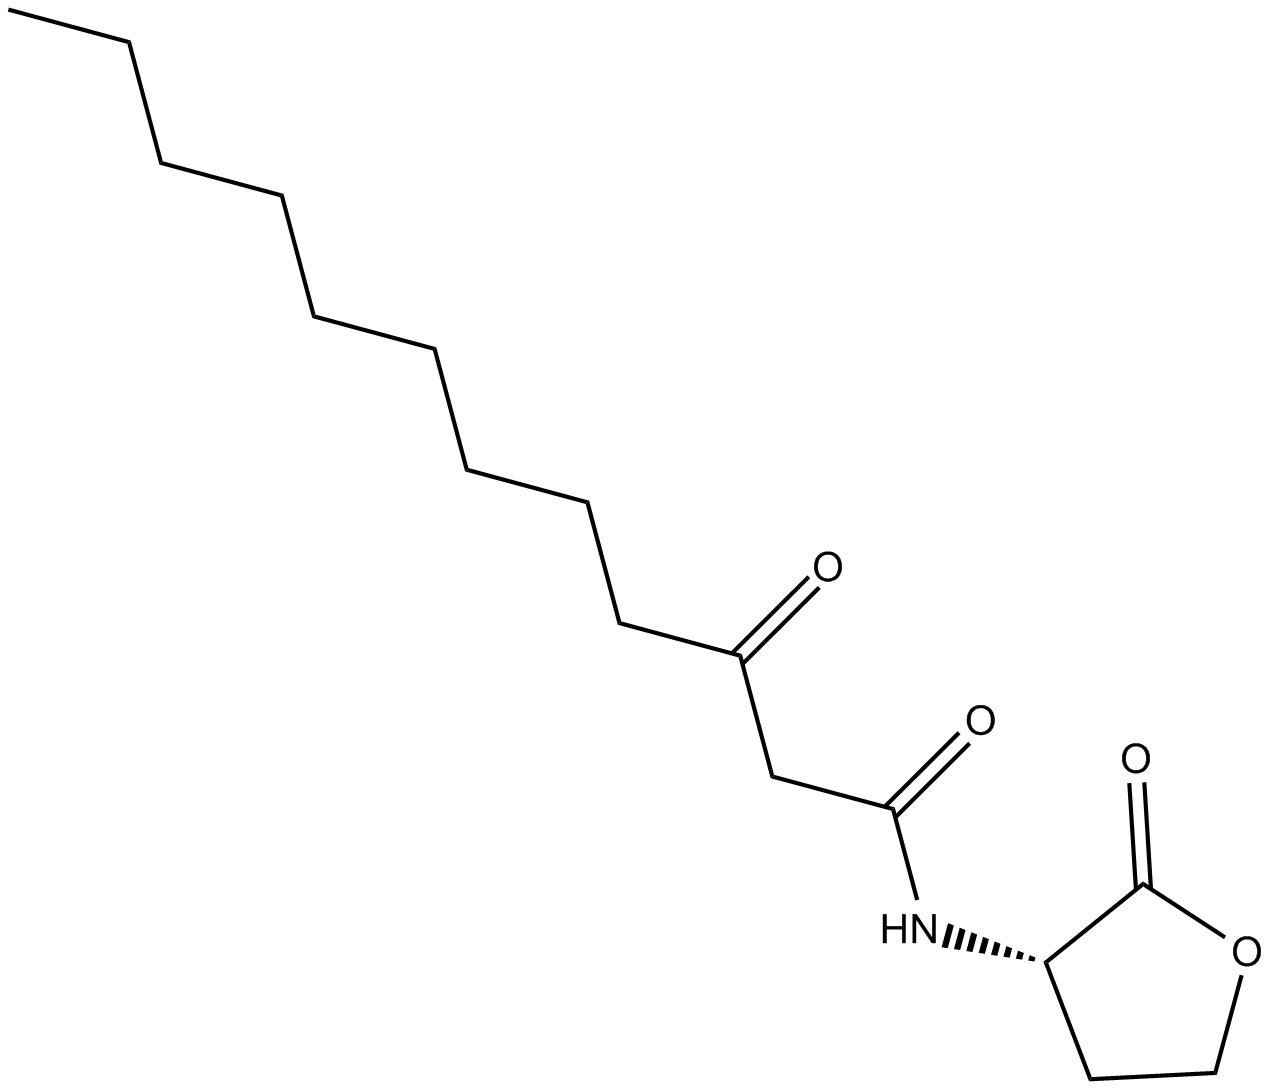 N-3-oxo-dodecanoyl-L-Homoserine lactone  Chemical Structure